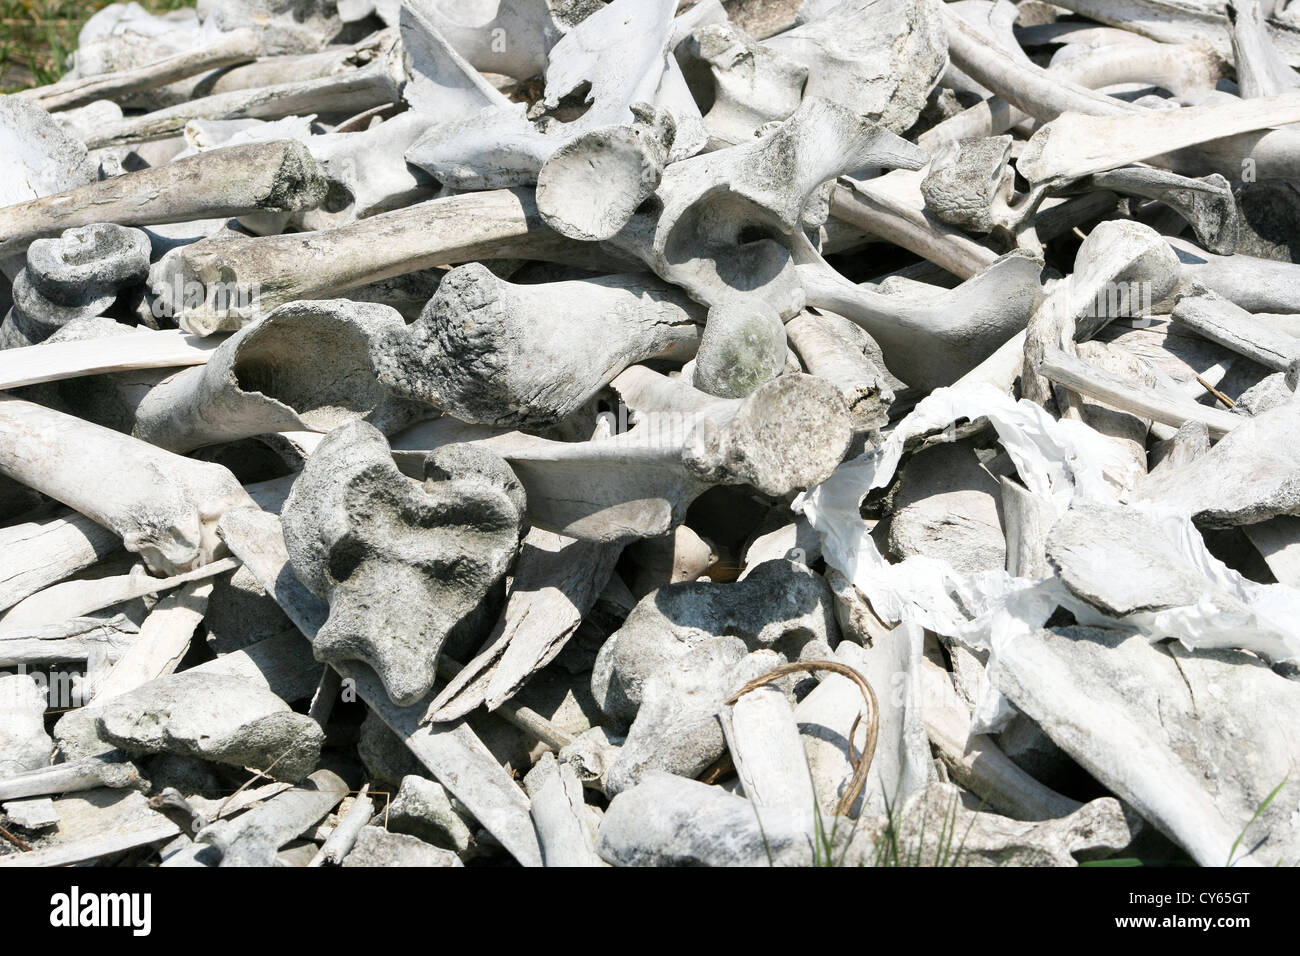 American Bison and White Tailed Deer bones being bleached by the sun in spring in Winnipeg, Manitoba, Canada Stock Photo